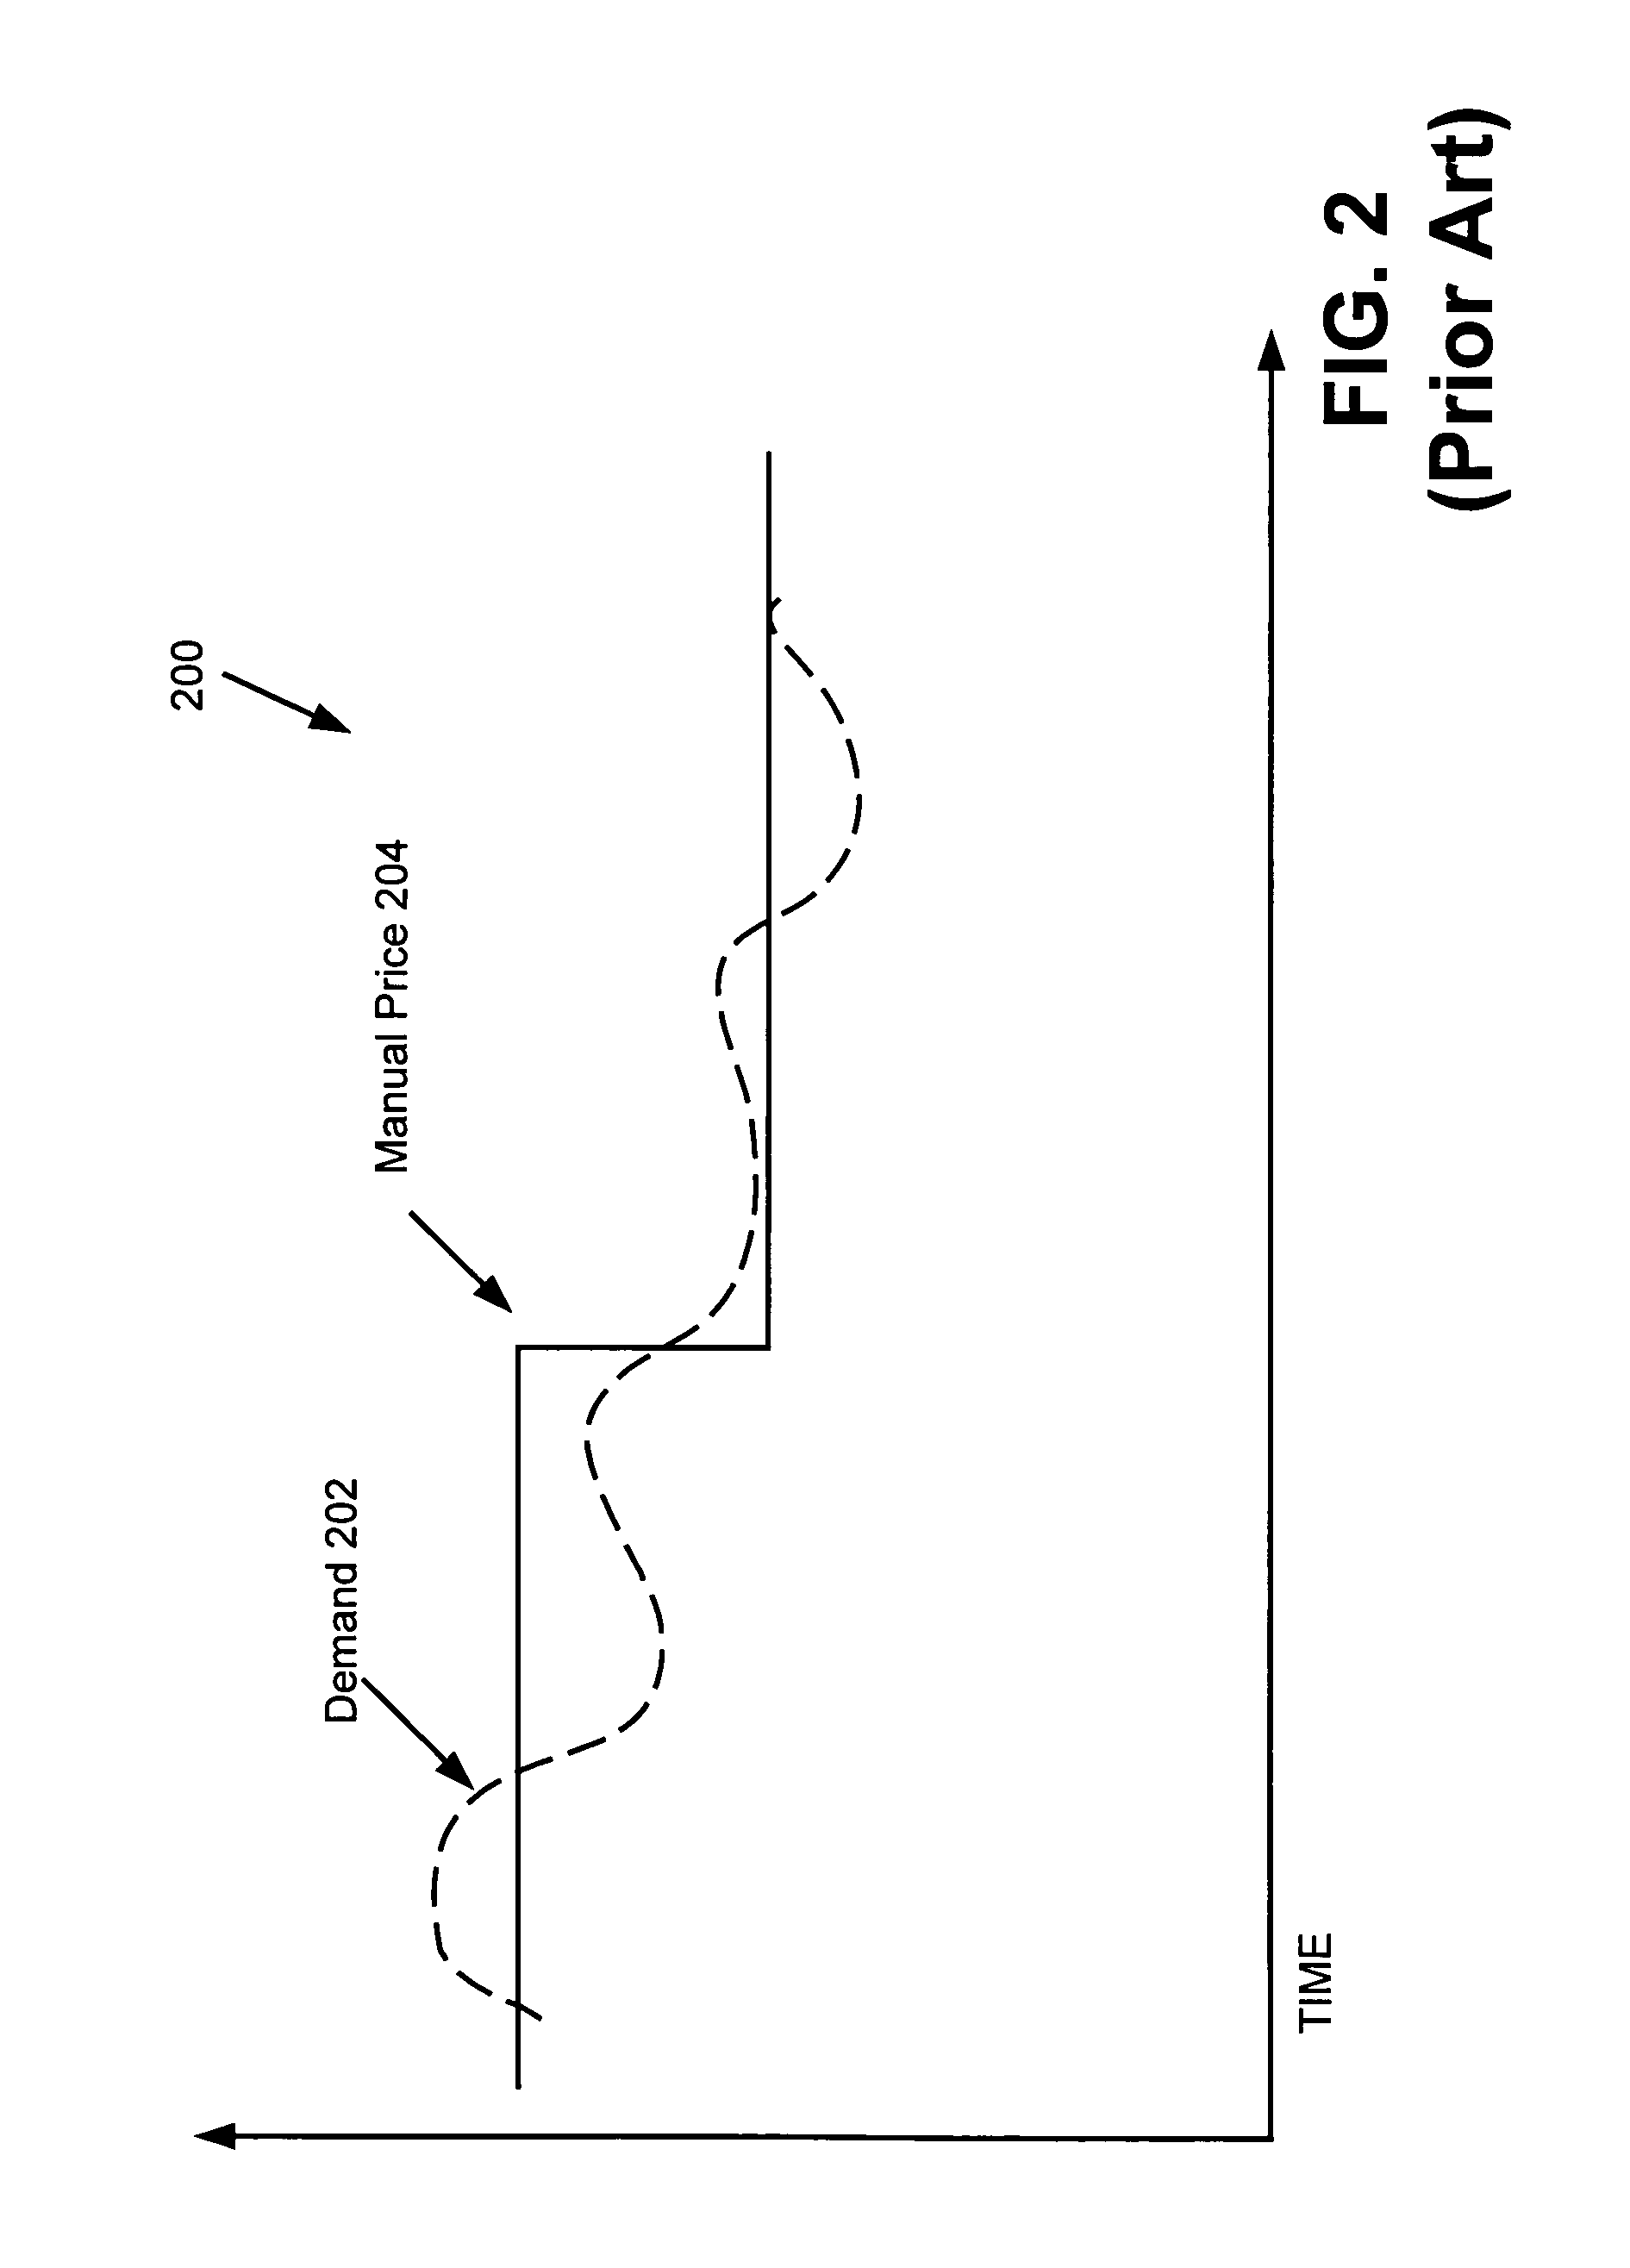 Method and apparatus for automatic pricing in electronic commerce